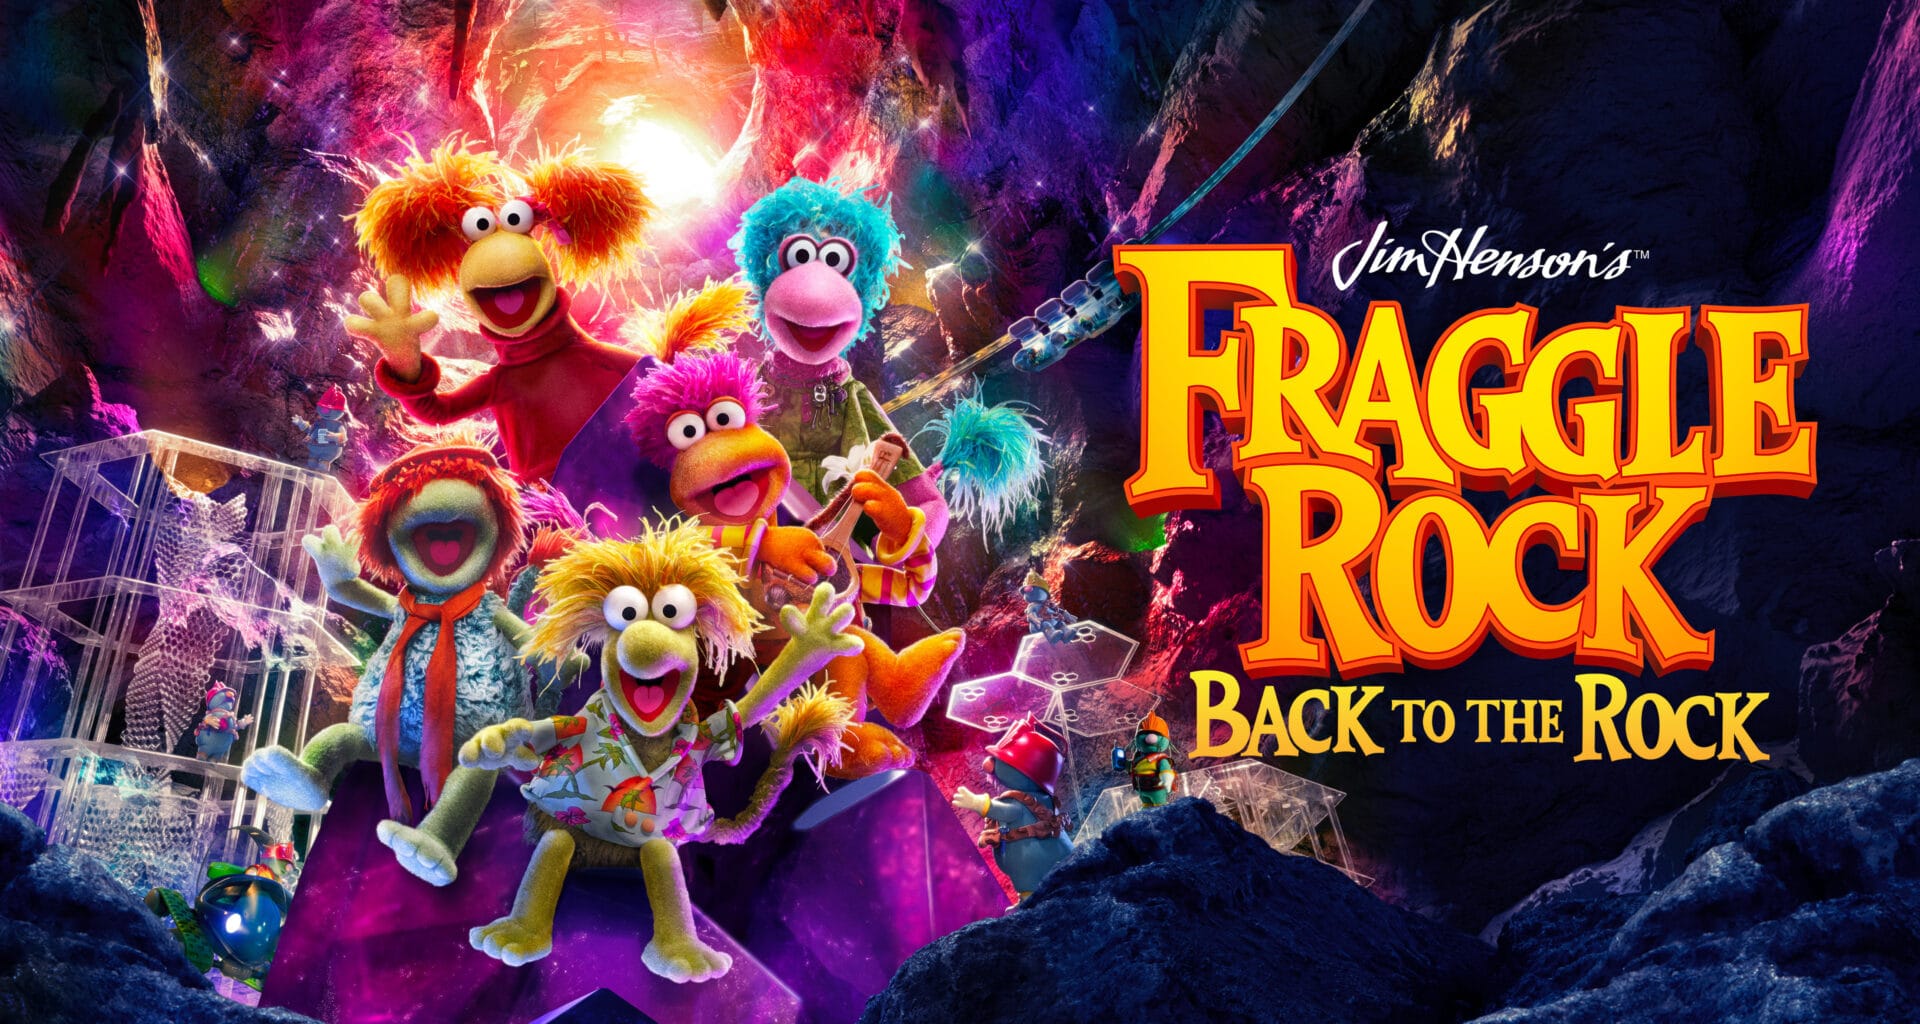 "Fraggle Rock: Back to the Rock"